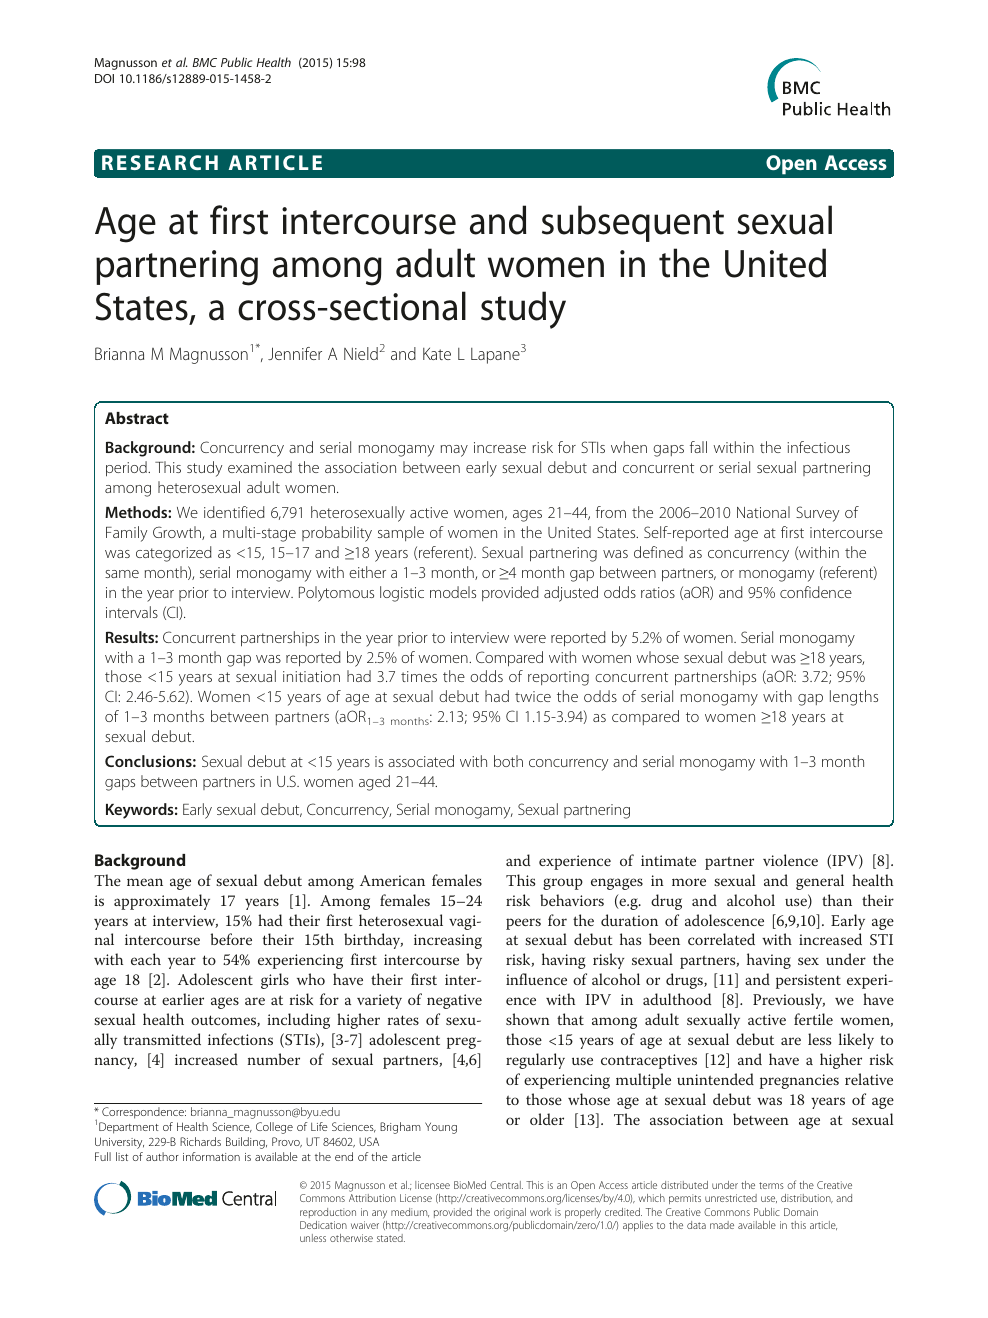 Age at first intercourse and subsequent sexual partnering among adult women in the United States, a cross-sectional study